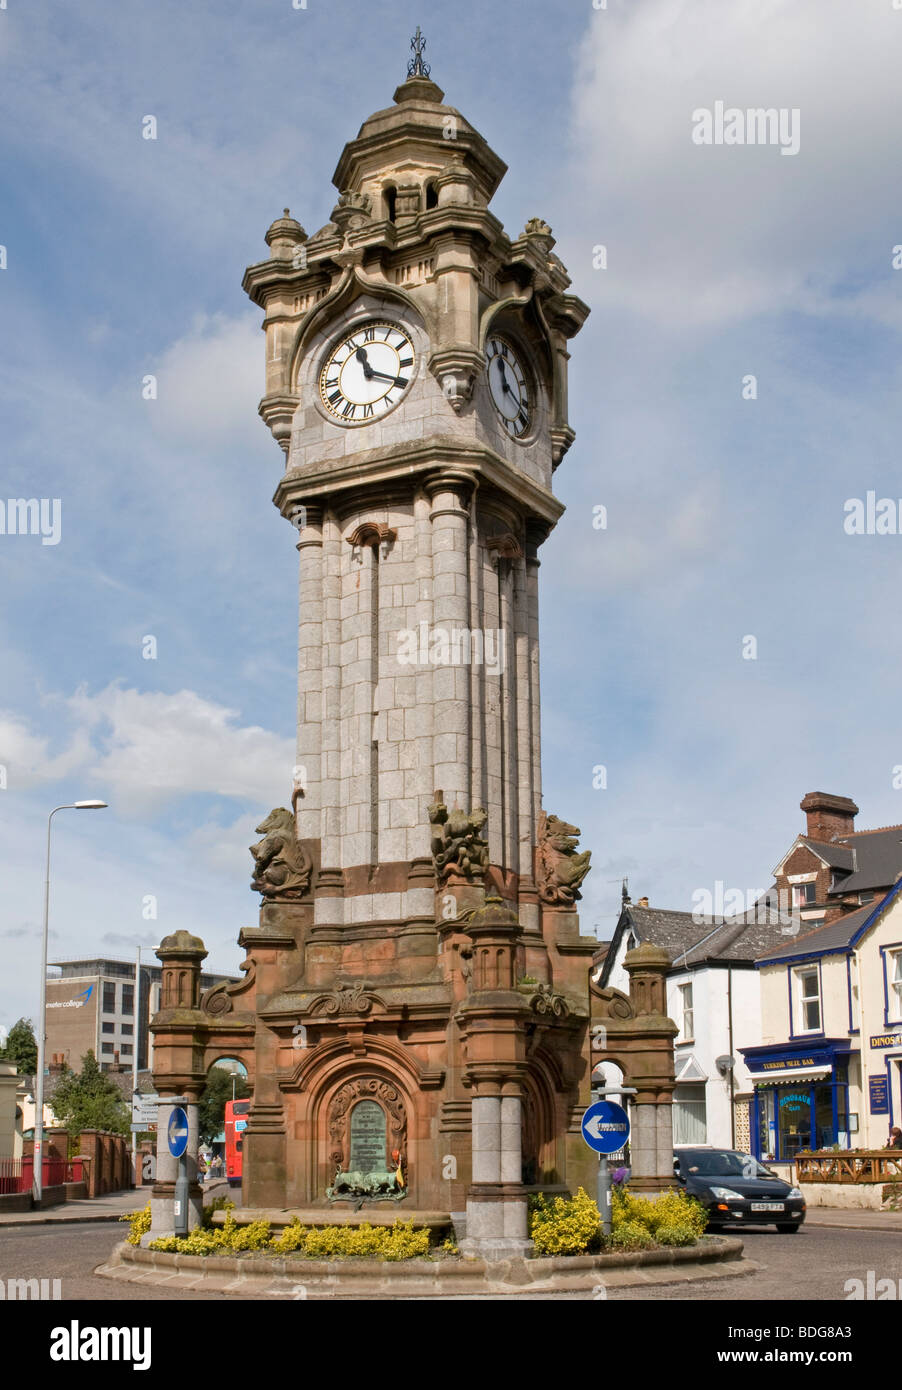 The Clock Tower, Exeter Stock Photo